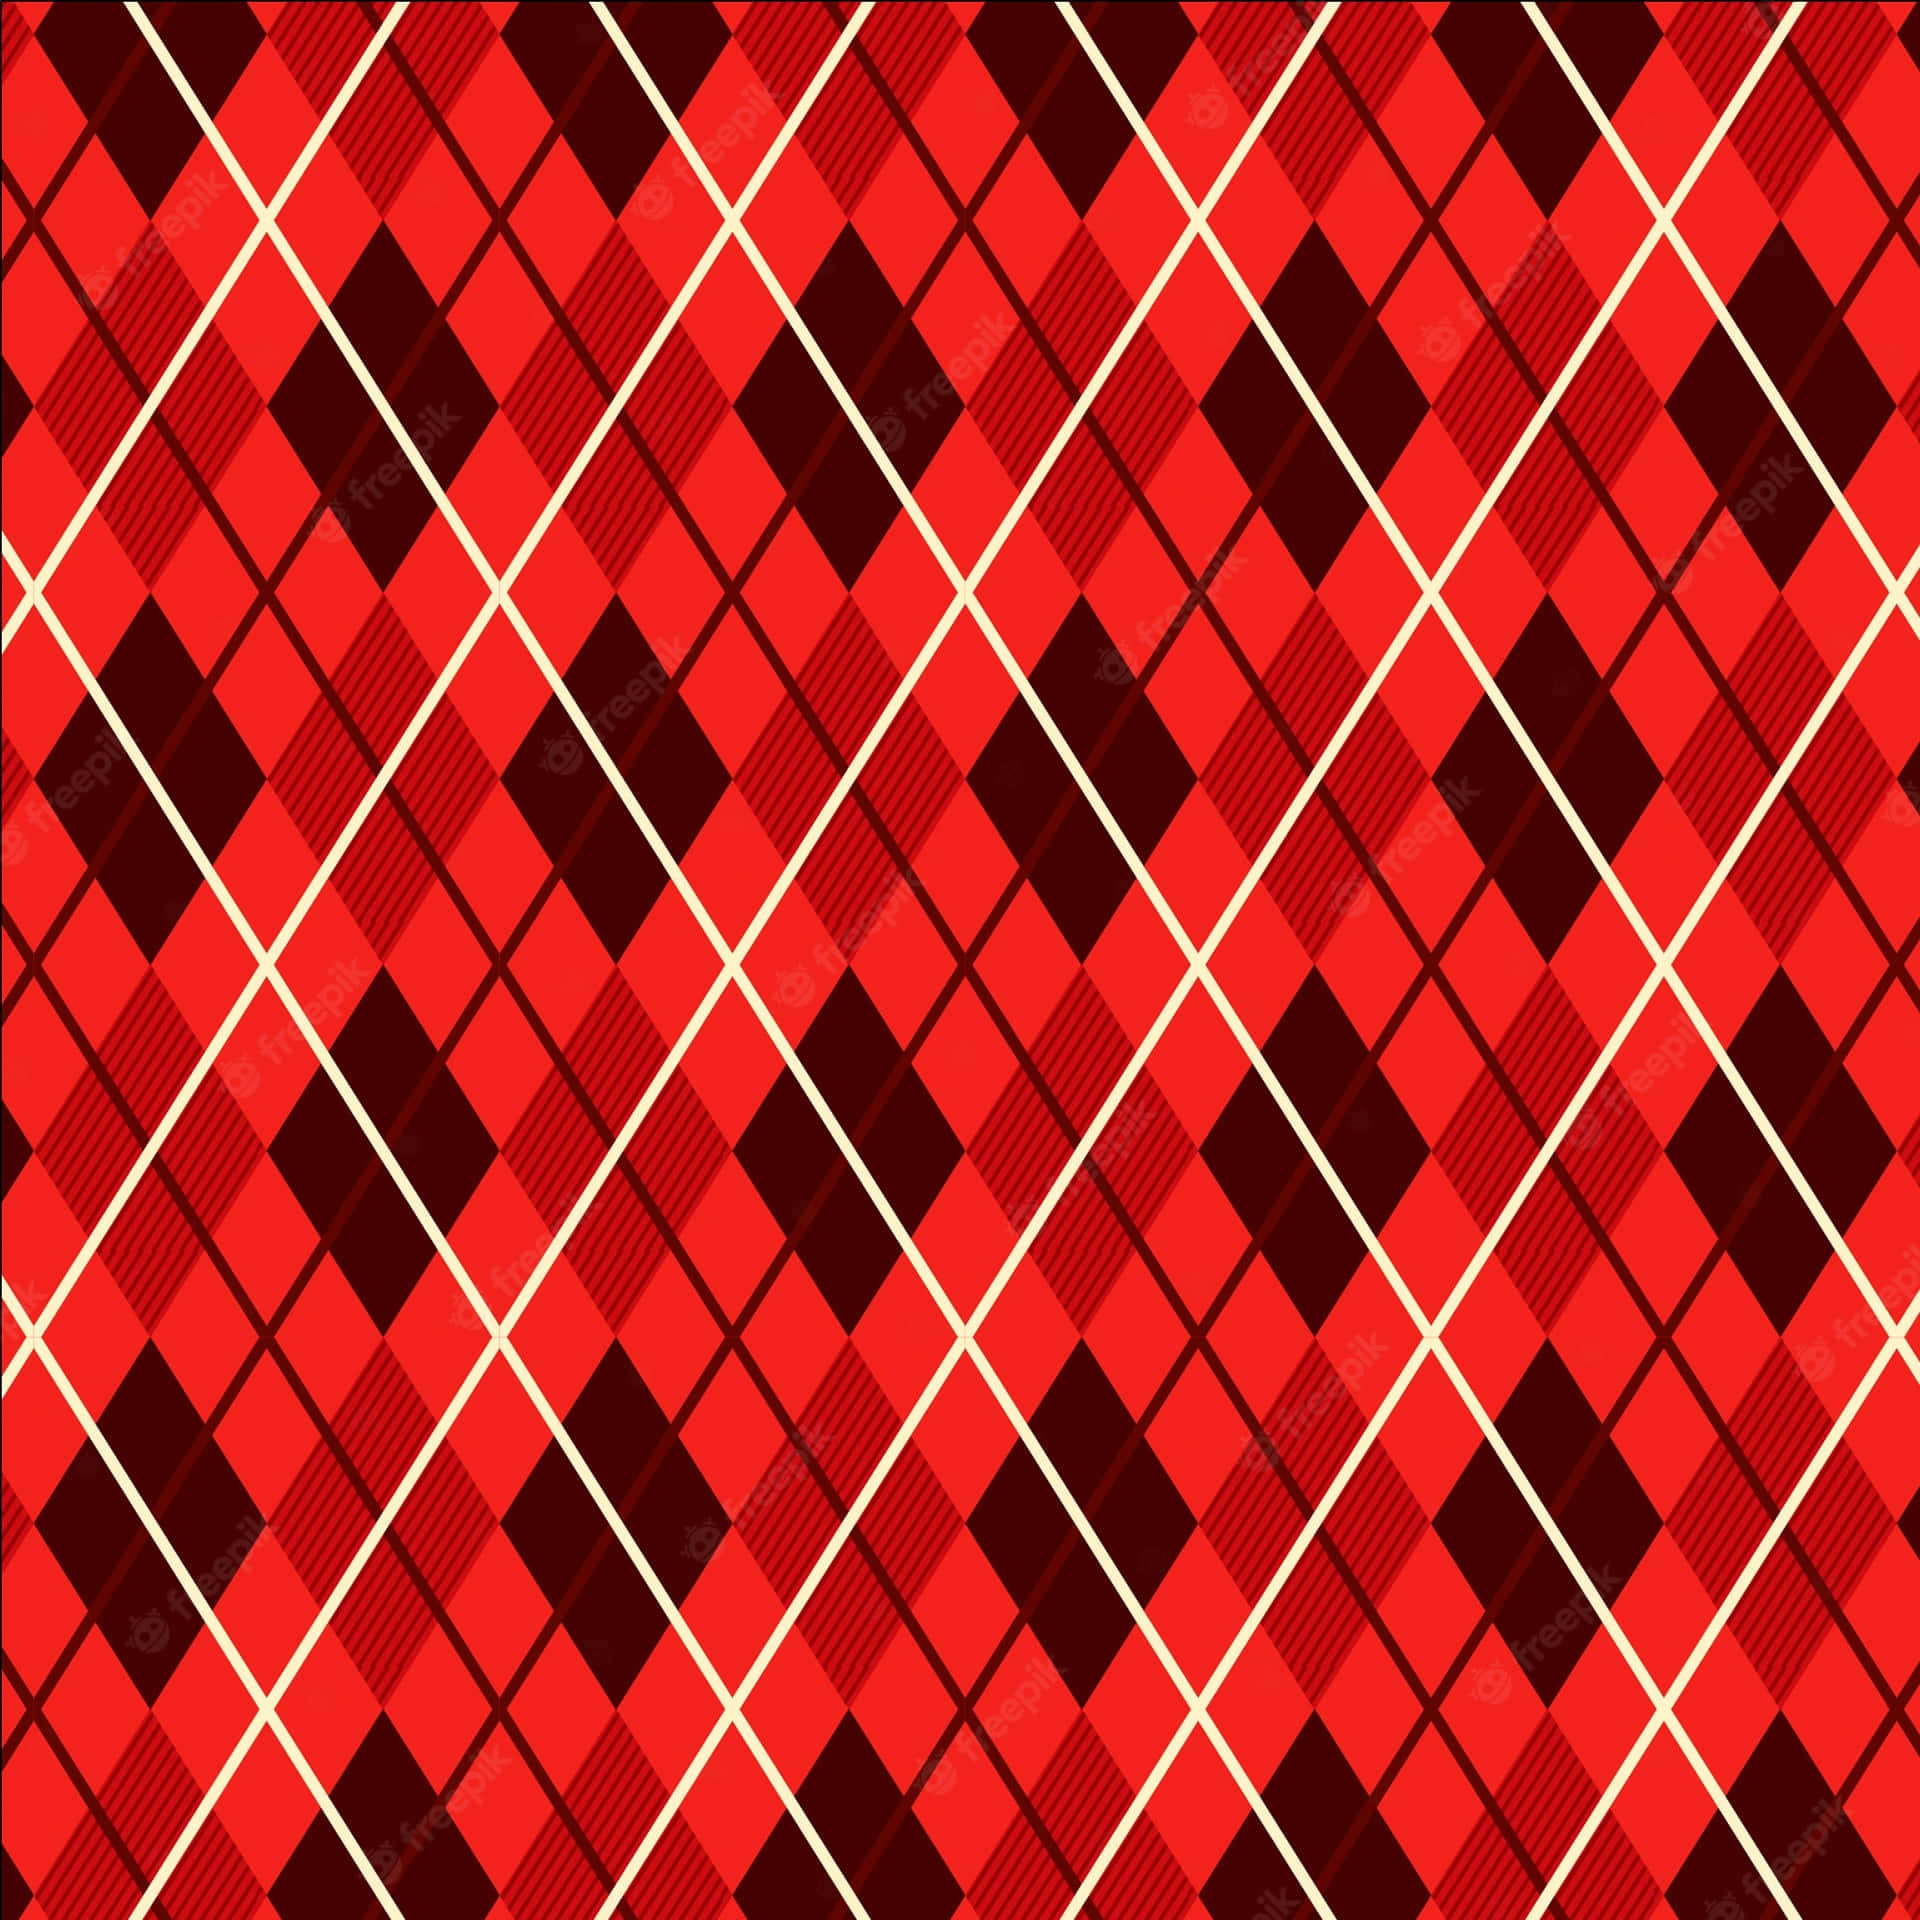 Black And White Tartan Plaid Seamless Pattern Background Stock Illustration   Download Image Now  iStock